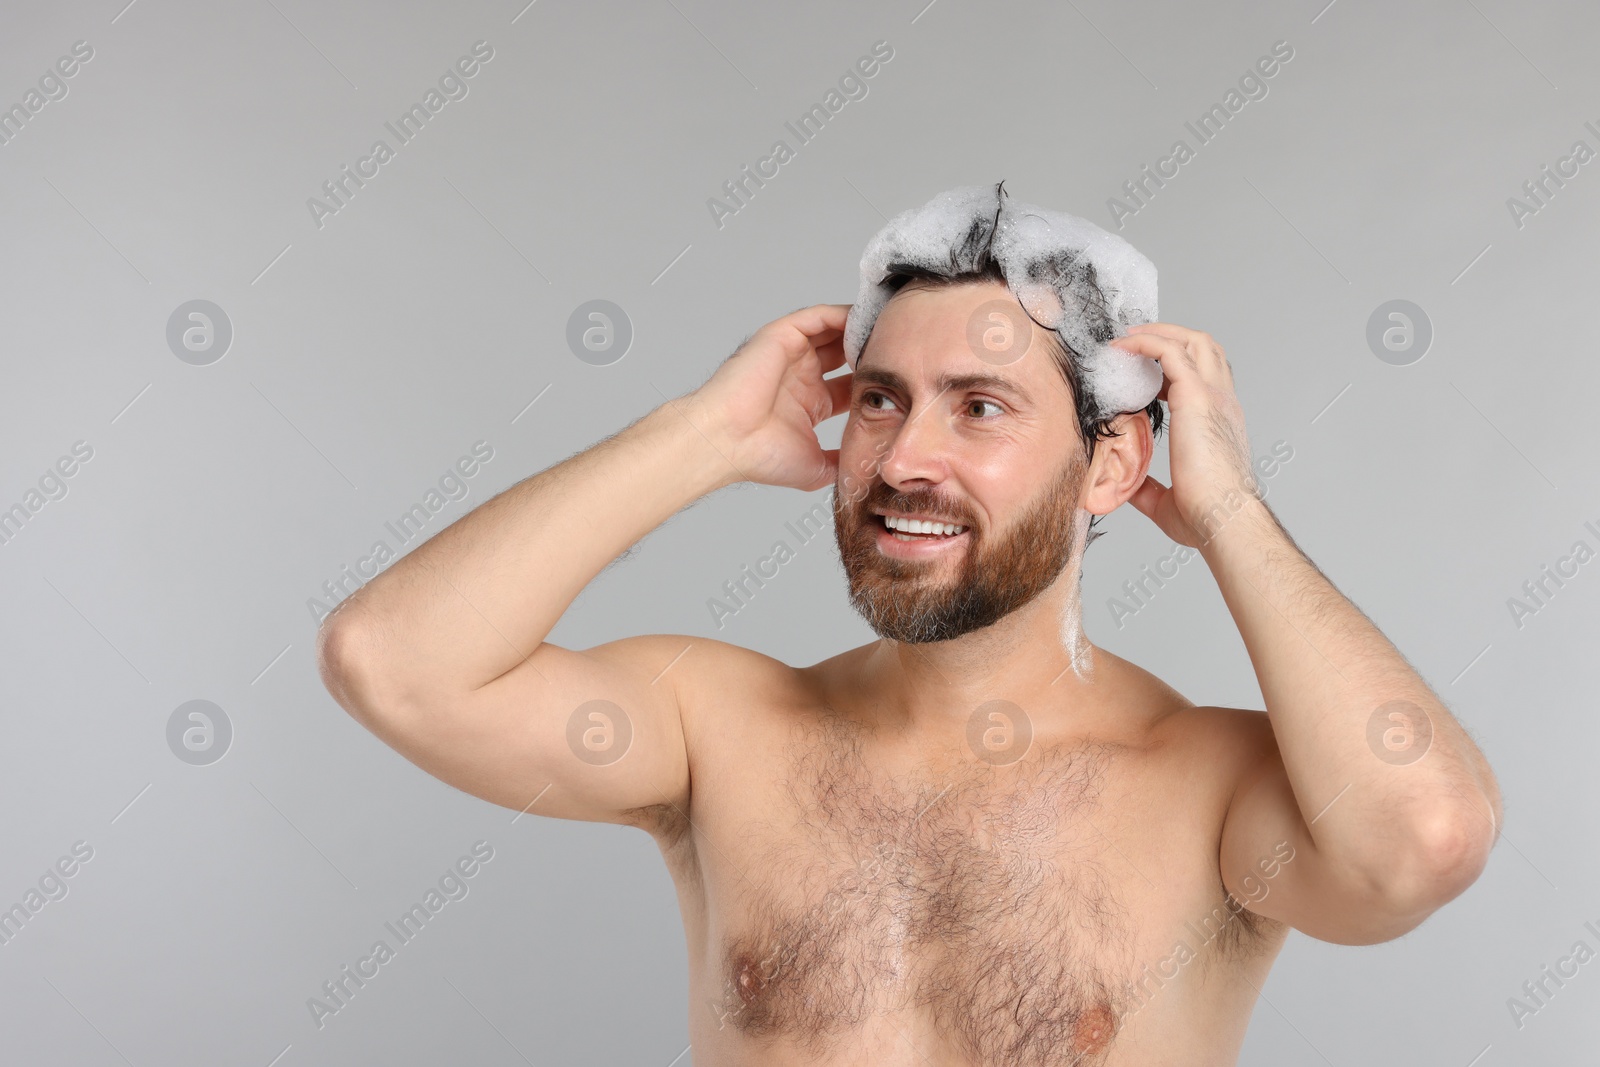 Photo of Happy man washing his hair with shampoo on grey background